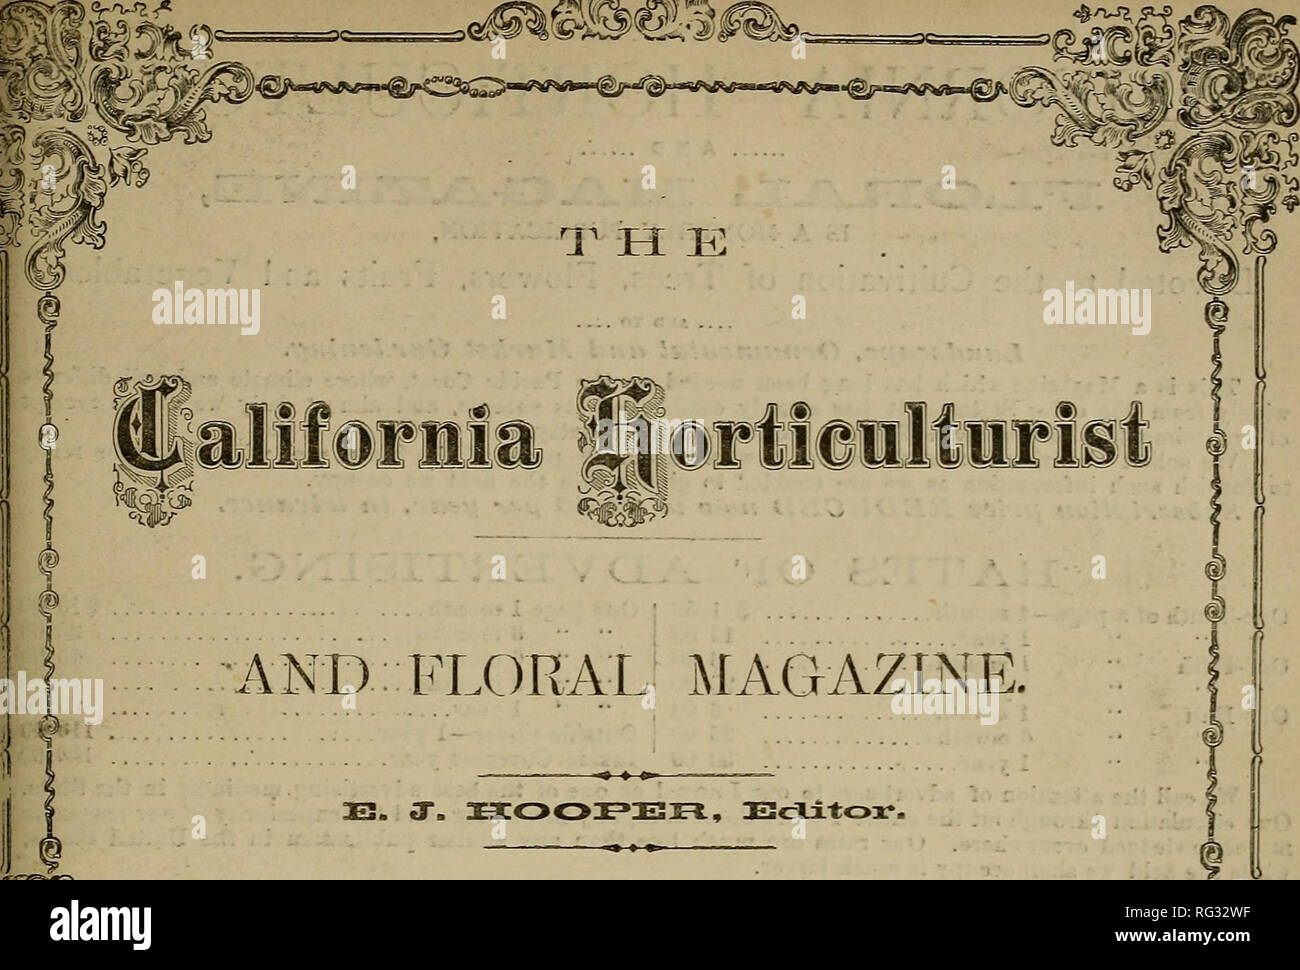 . The California horticulturist and floral magazine. Fruit-culture; Gardening. Vol. VIII. JULY, 1878.. TABLE OF CONTENTS. Original Articles. page Garden Notes for July Charles H. Shinn. 19? General Management of Aquatic Plants By Florist. 198 Landscape Gardening By Horticulturist. 19D The Fruit Mark, t 201 Thinning and Digging By W. C. L. Drew. 203 California Dicentra By W. C. L. Drew. 204 Rod and Gun. La Belle Eiviere &quot; 205 Scenery near Singapore 2C8 206 Twilight in the Tropics 207 207 Pike Fishing in the East 213 The Ohio Biver, or The Ponds Suitable for Black Bass Life in Greenland Sel Stock Photo